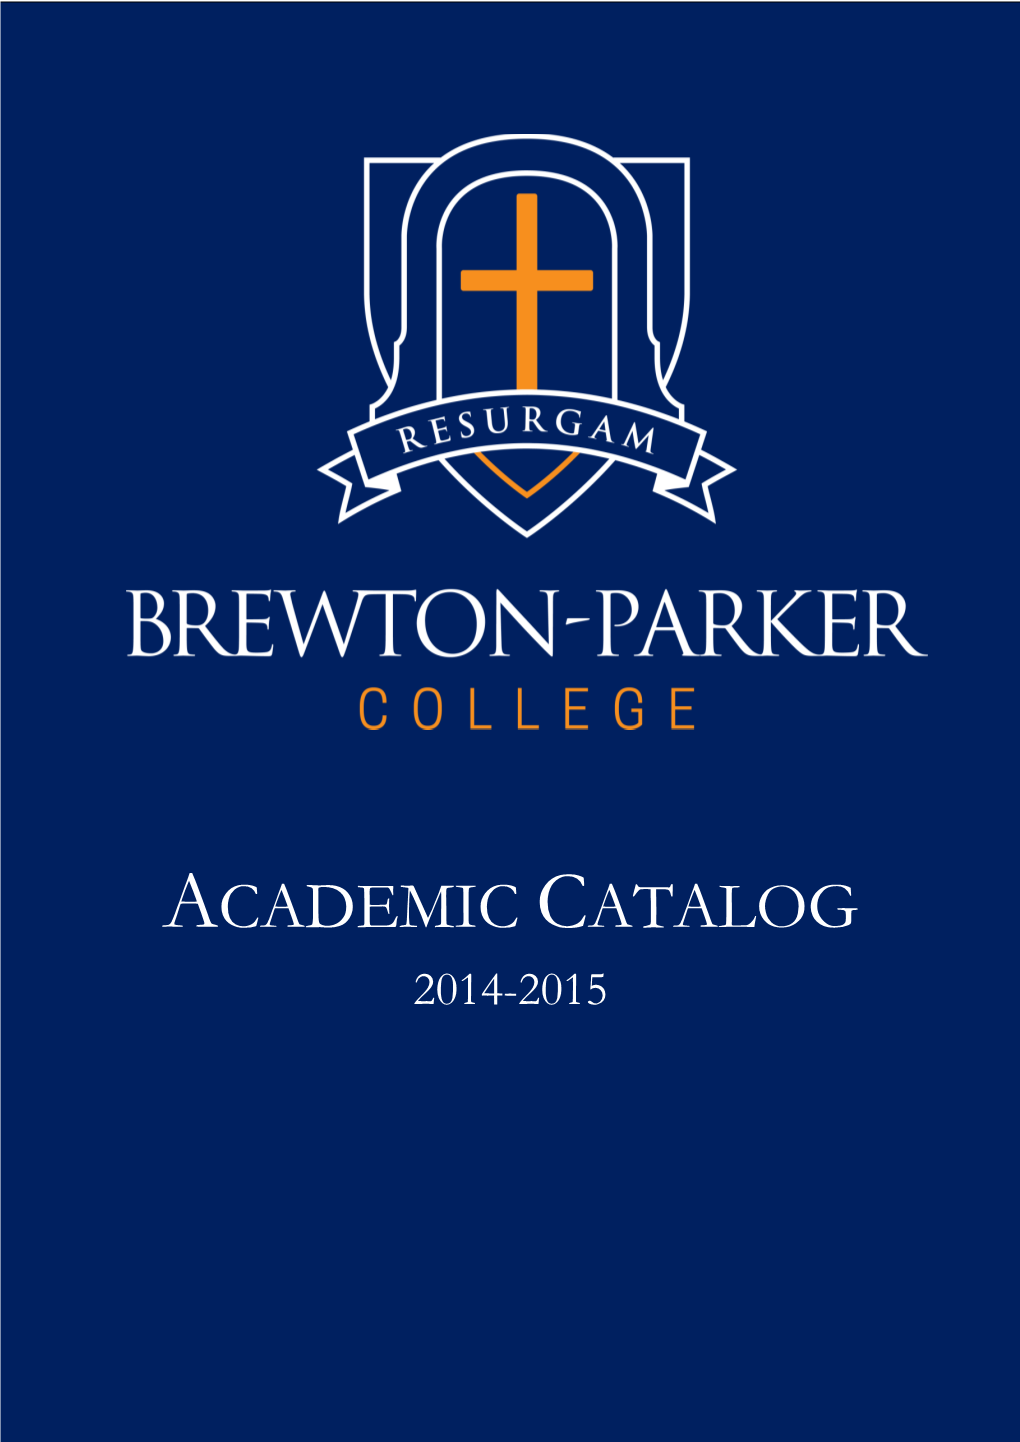 Academic Catalog Brewton-Parker College 2014-2015 Page 0 of 173